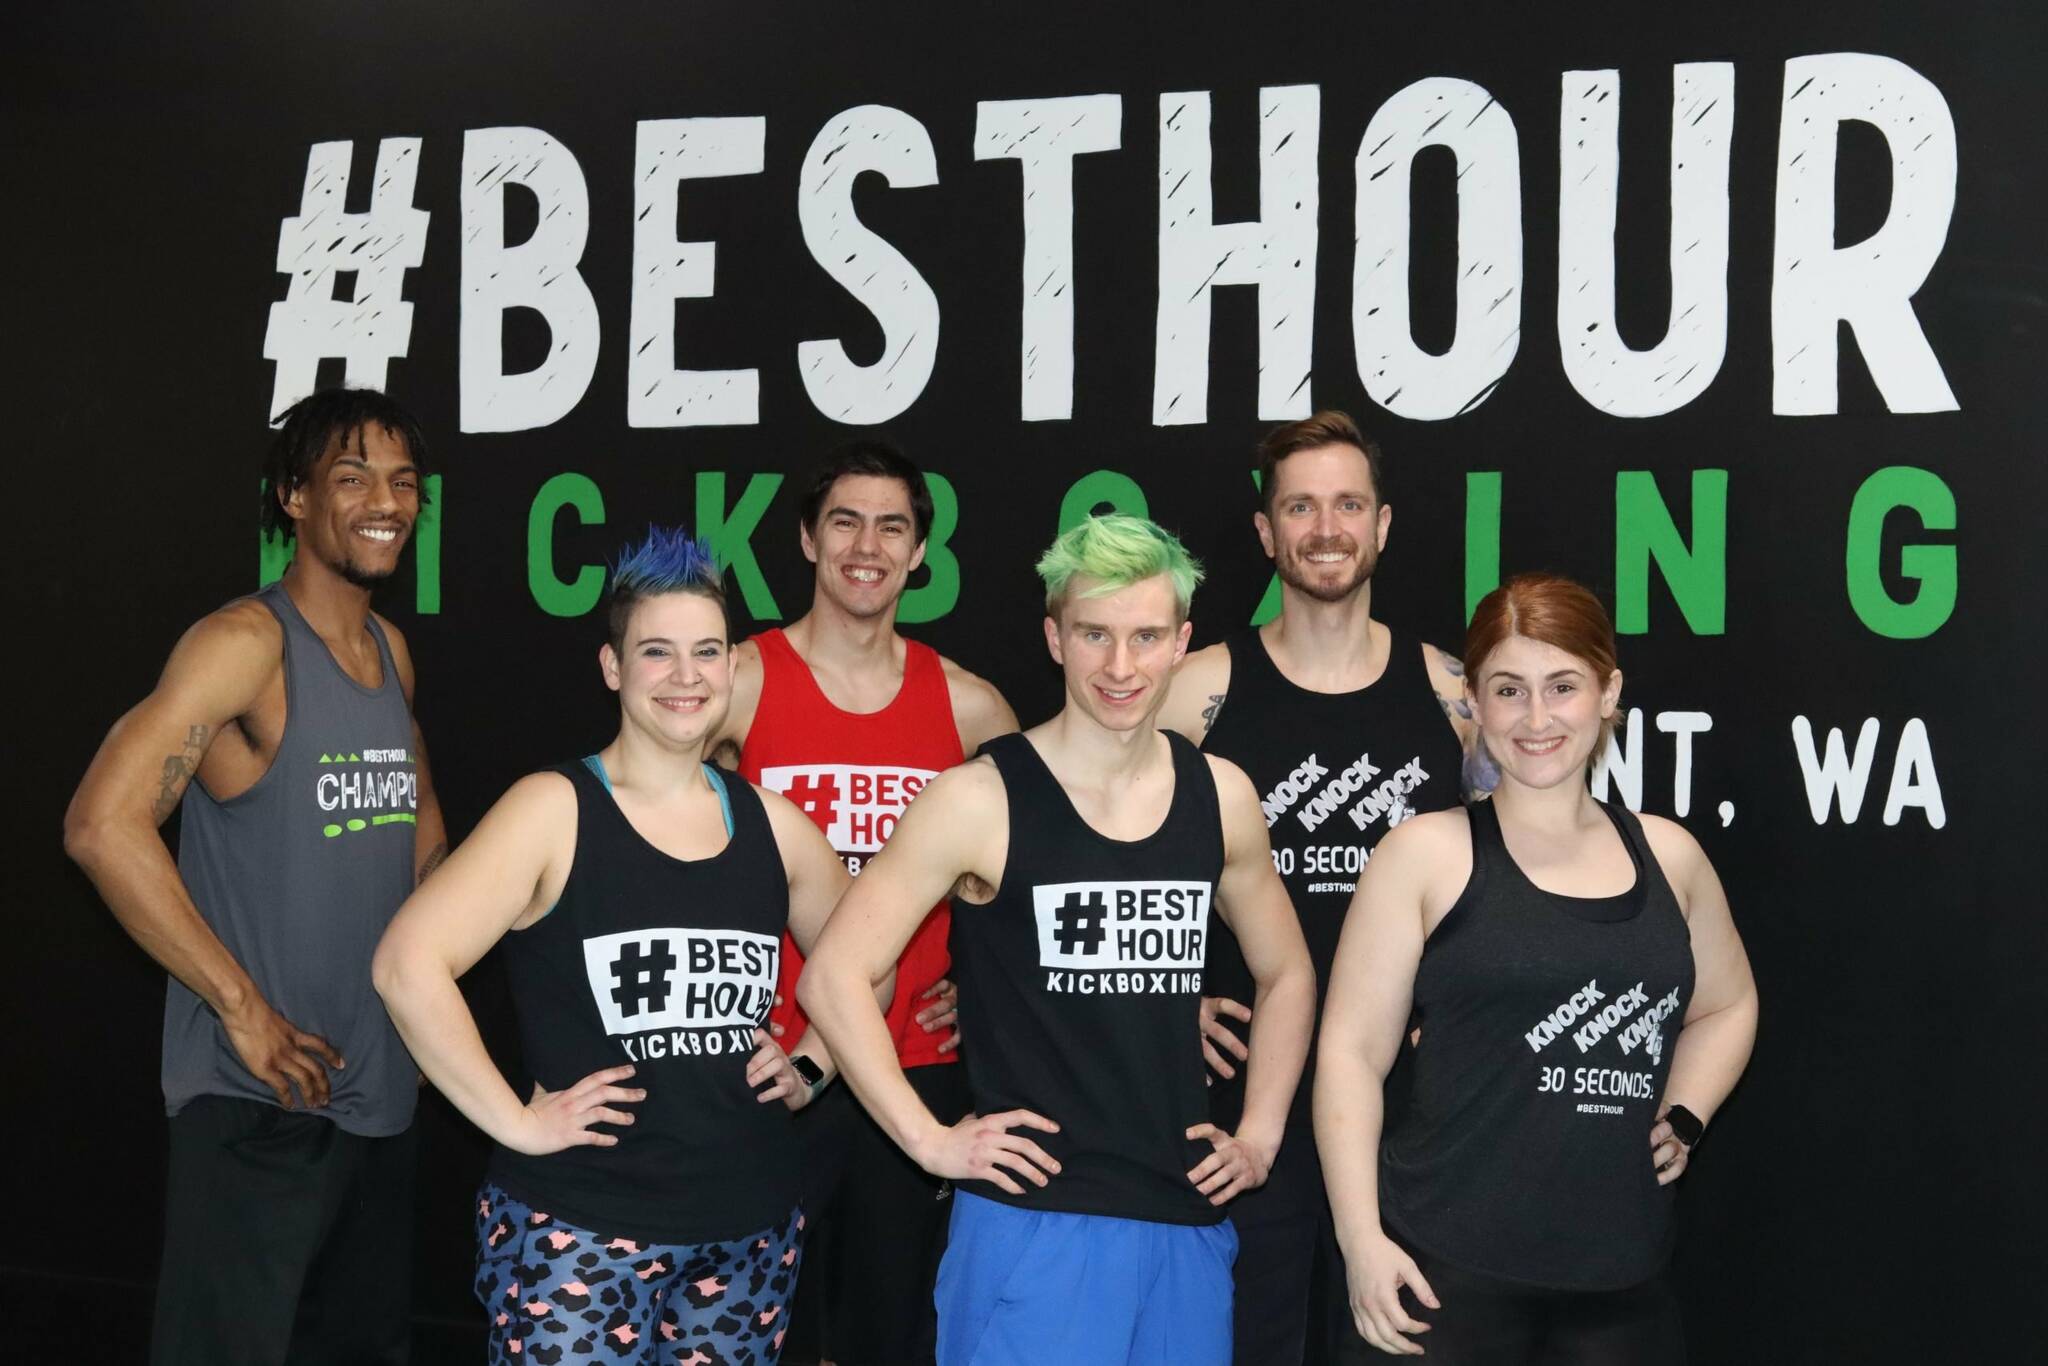 Courtesy photos
The #BestHour Kickboxing trainers.